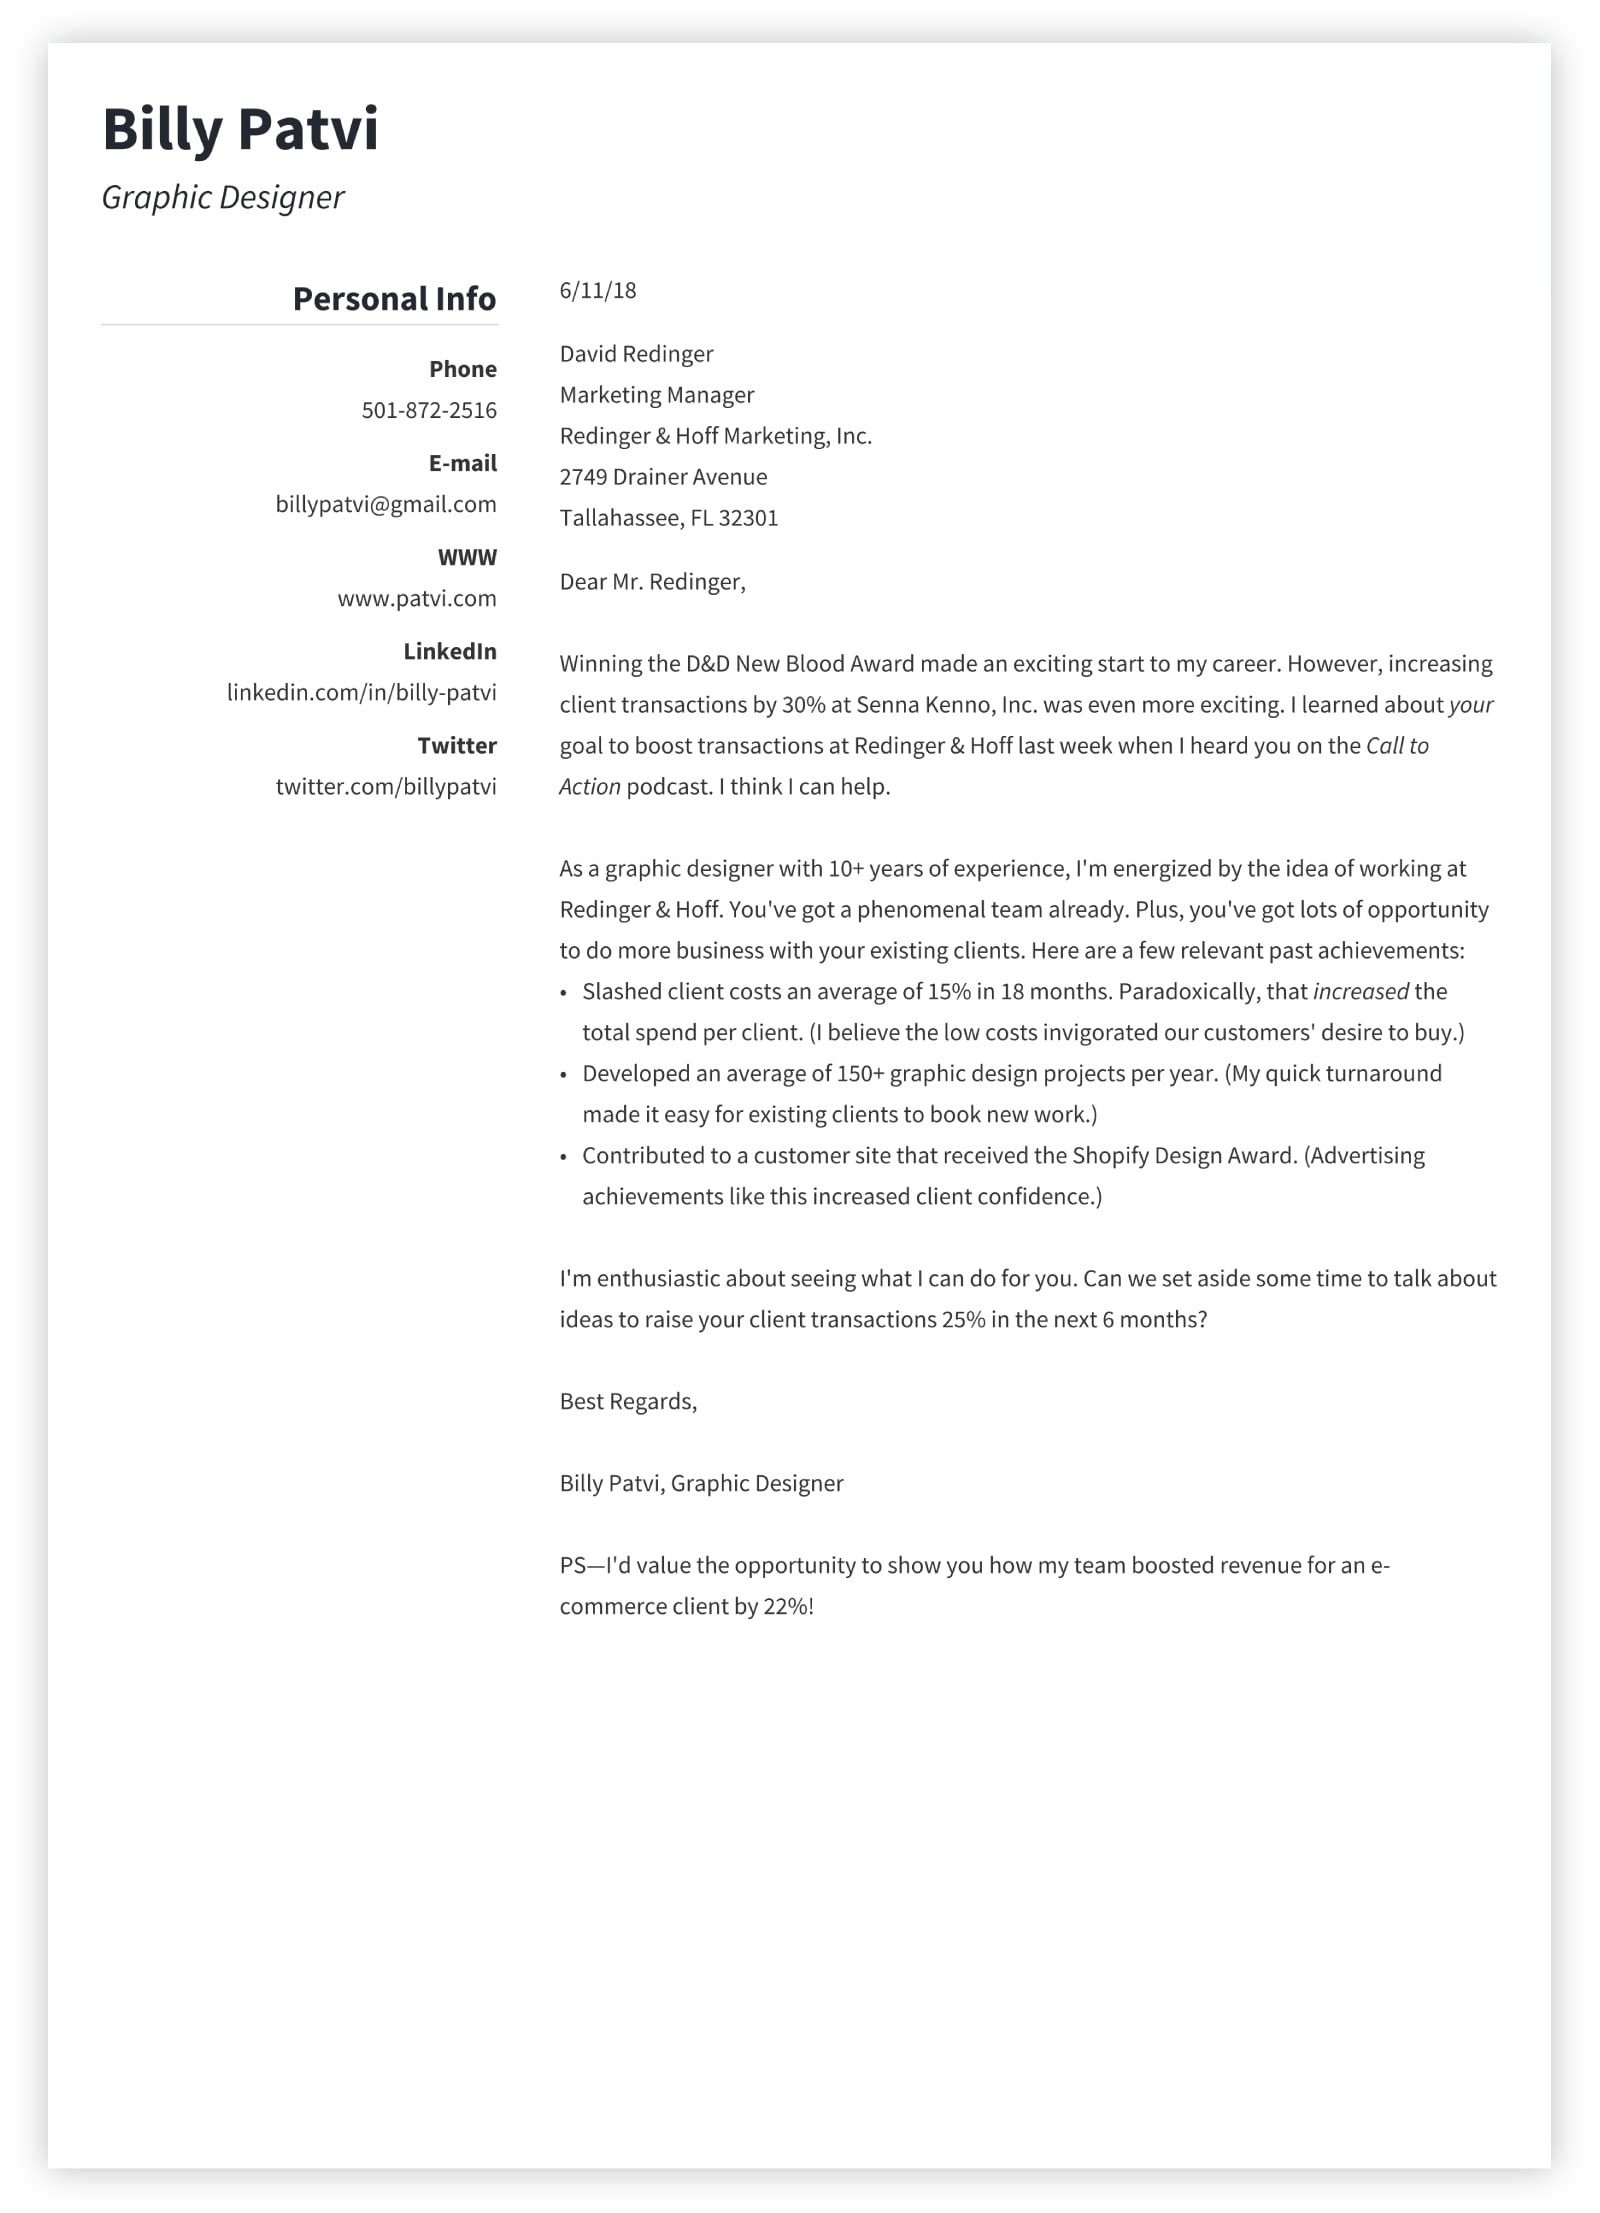 Sample Cover Letter for Resume Basic How to Write A Cover Letter for Any Job In 8 Simple Steps